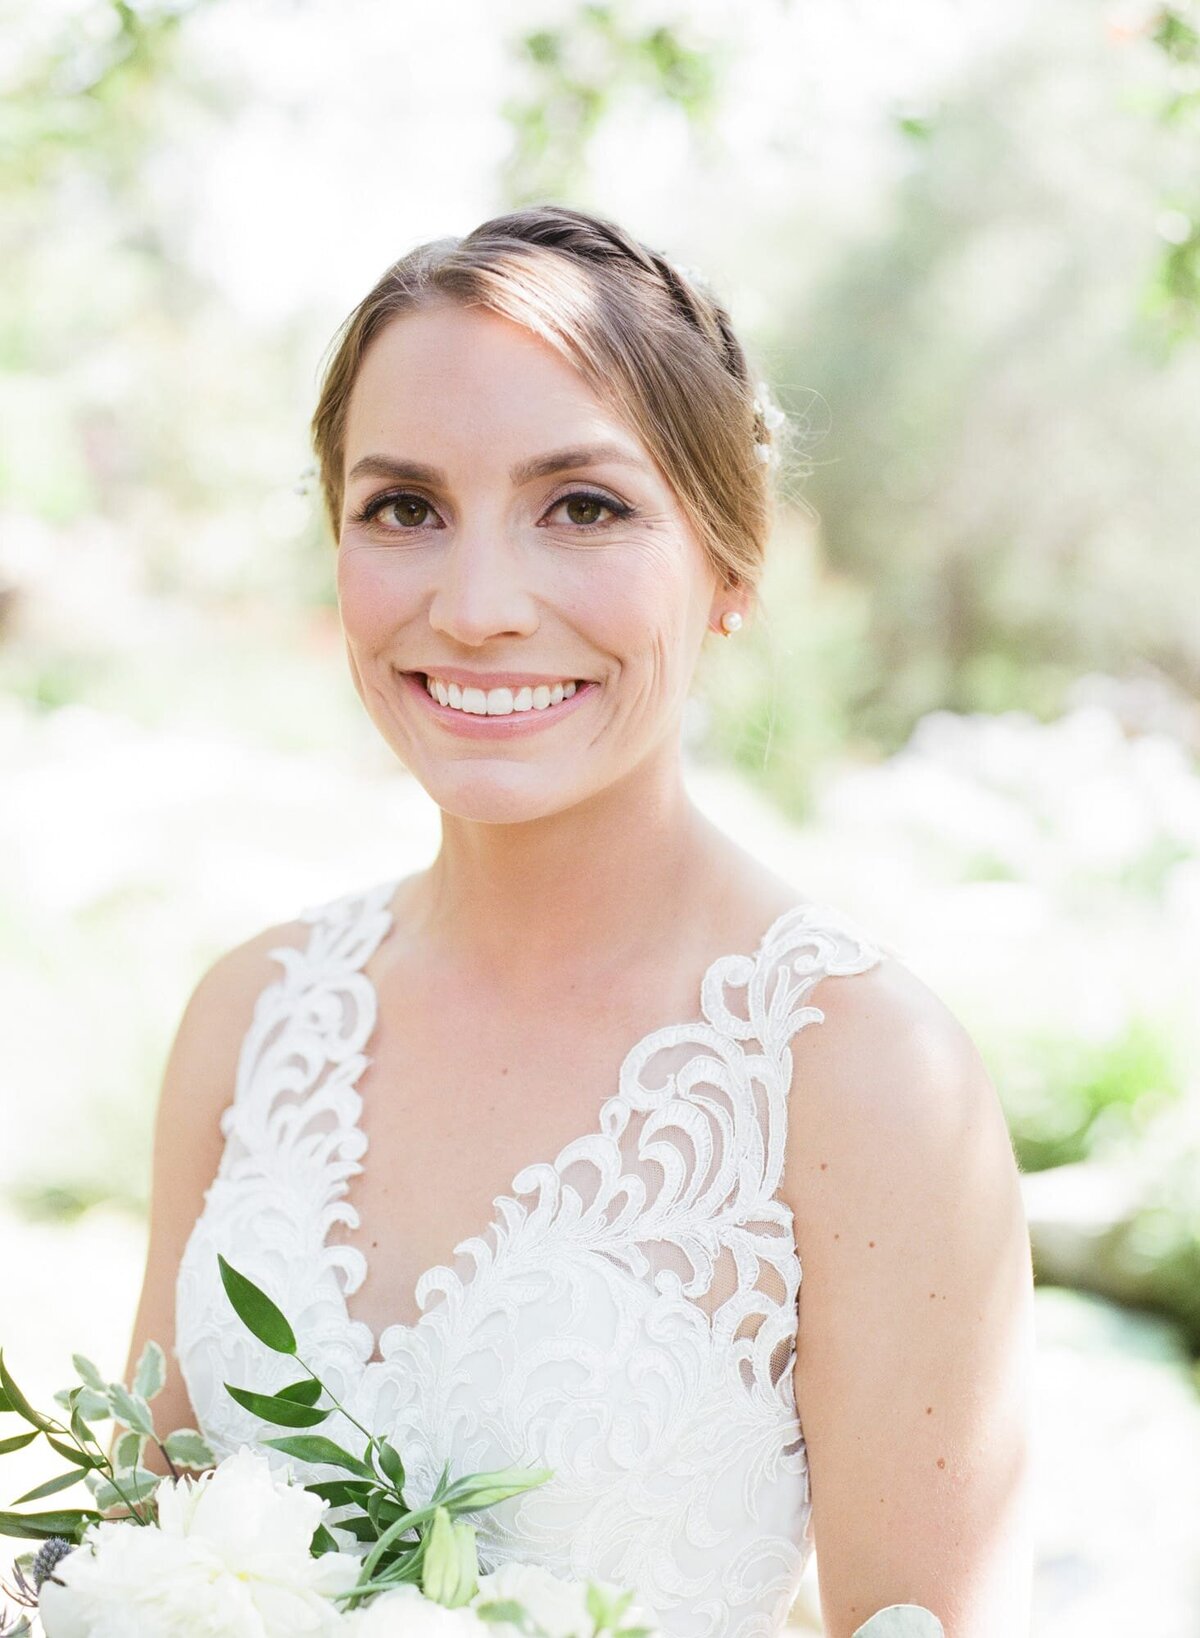 Bride poses with a bouquet of white flowers while wearing a sleeveless wedding dress.